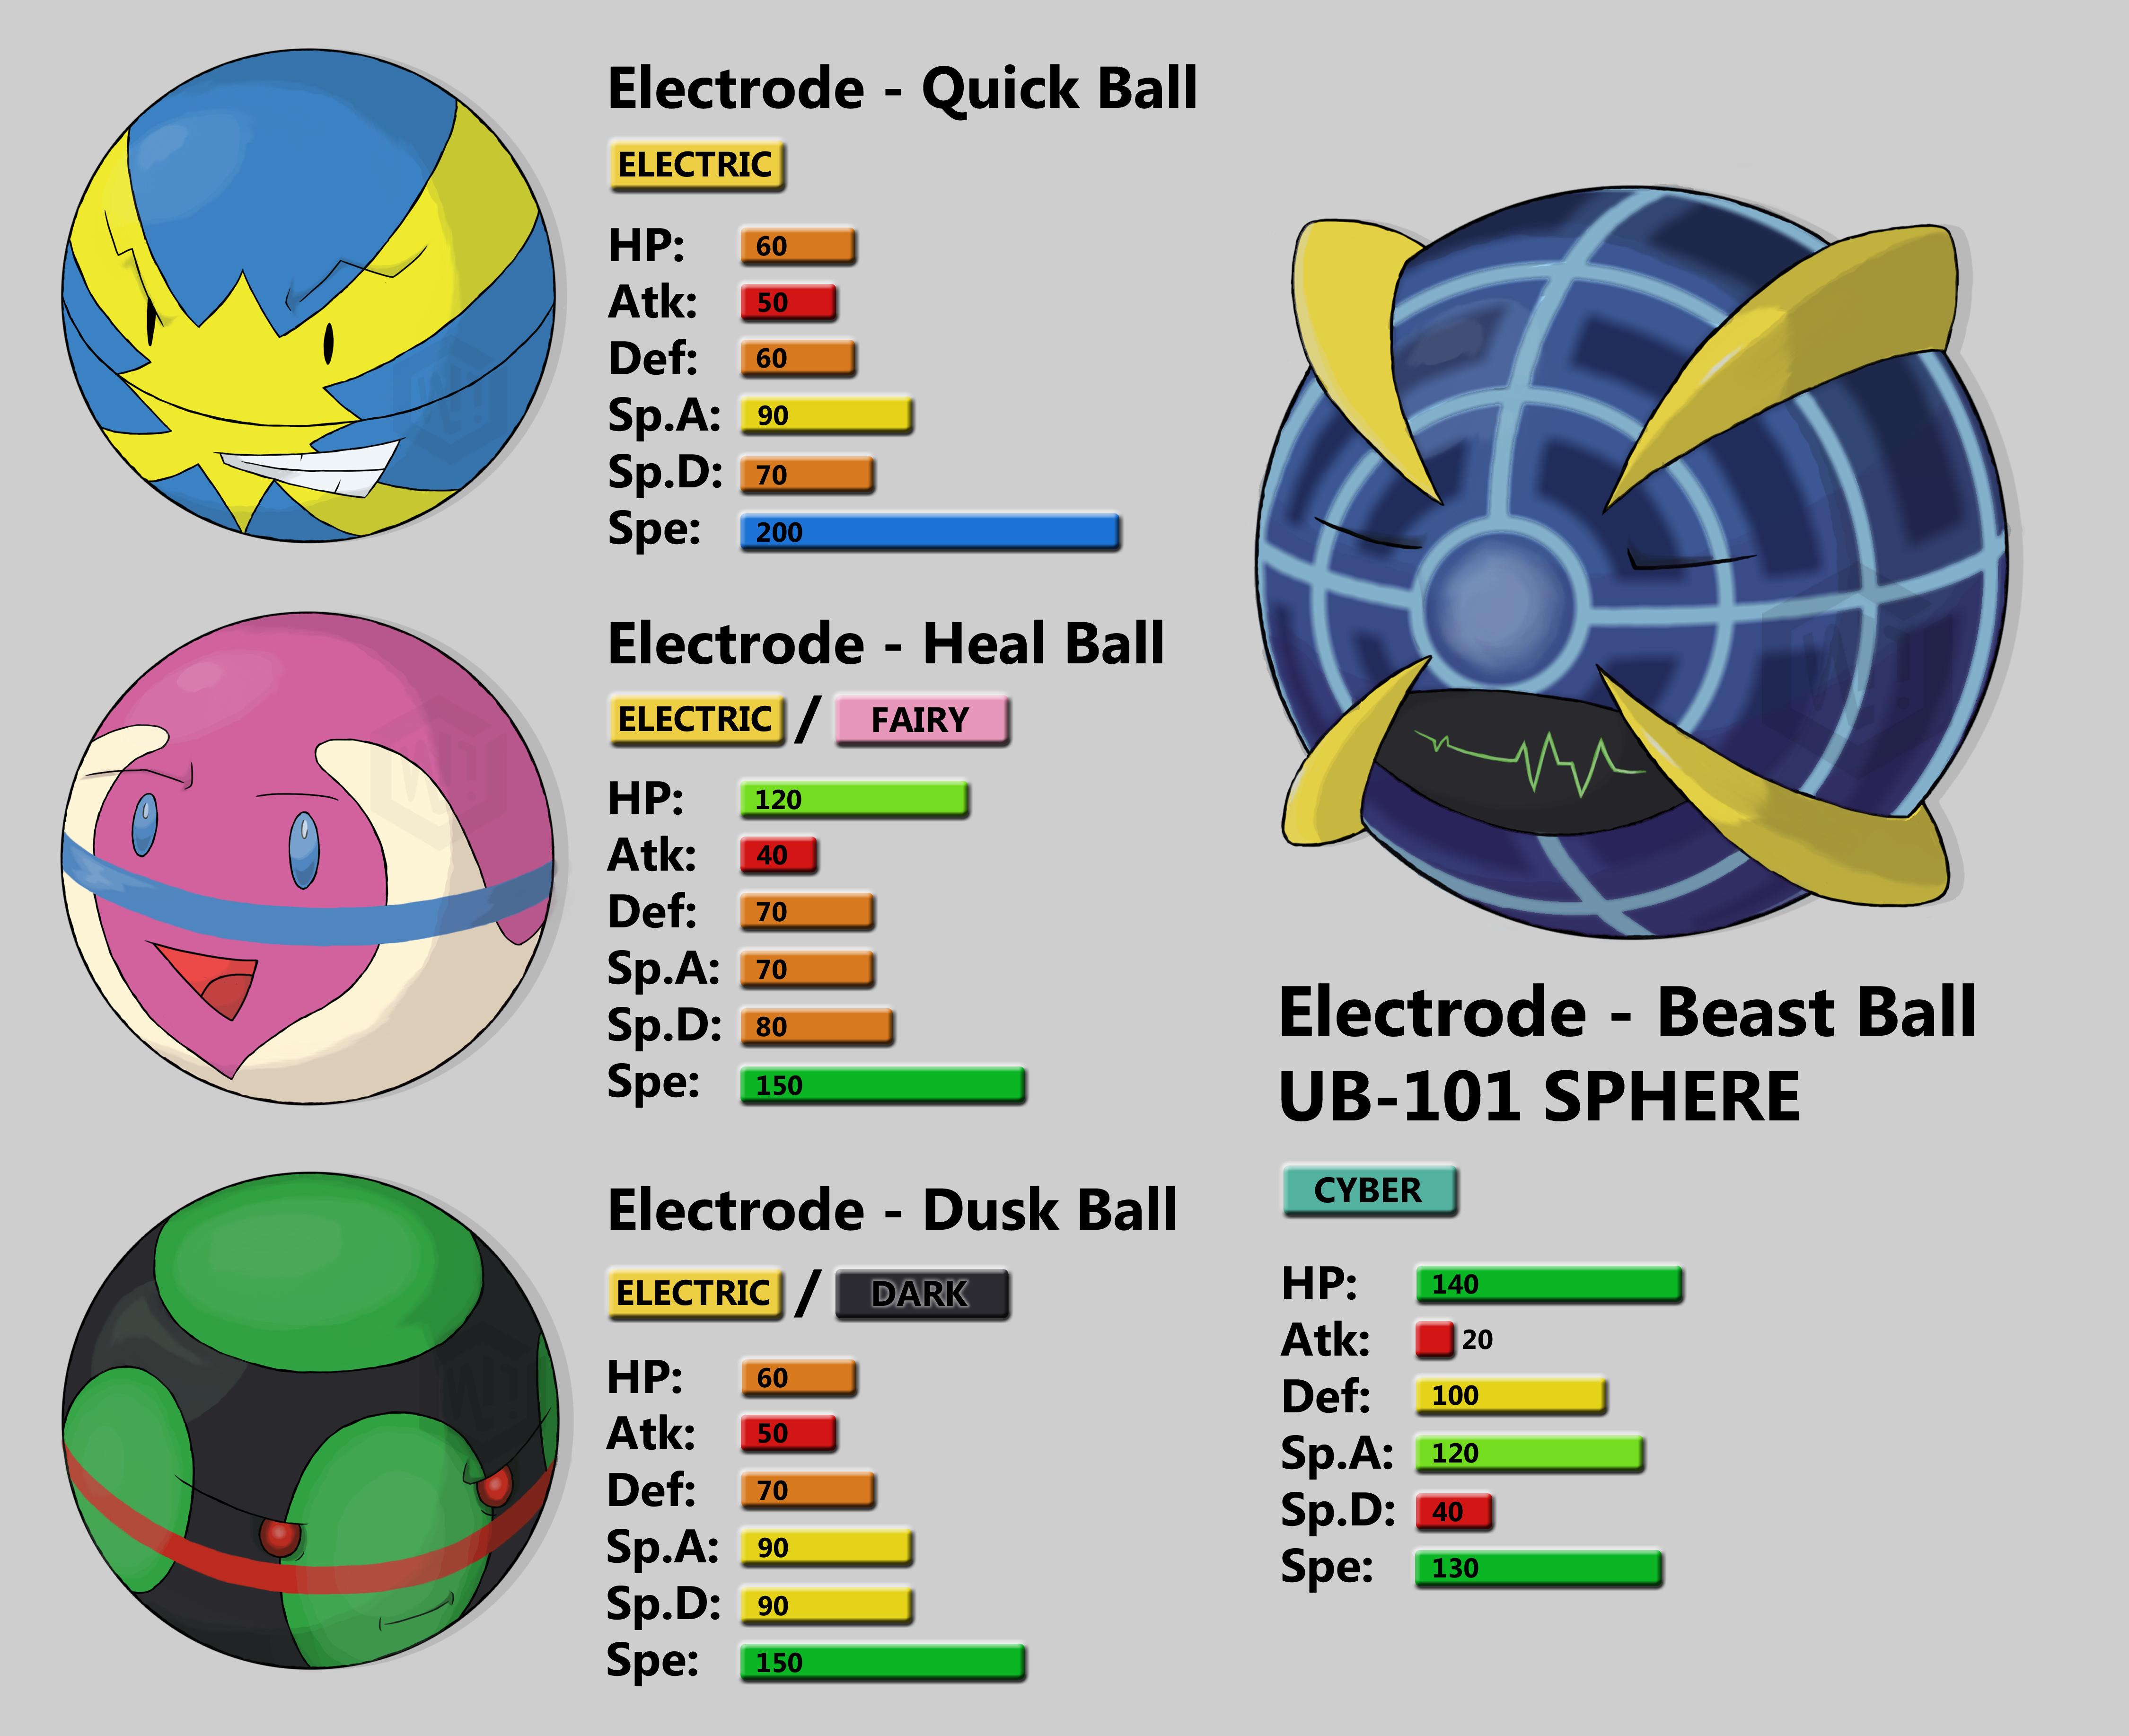 art goes here — convergent evolutions for voltorb and electrode